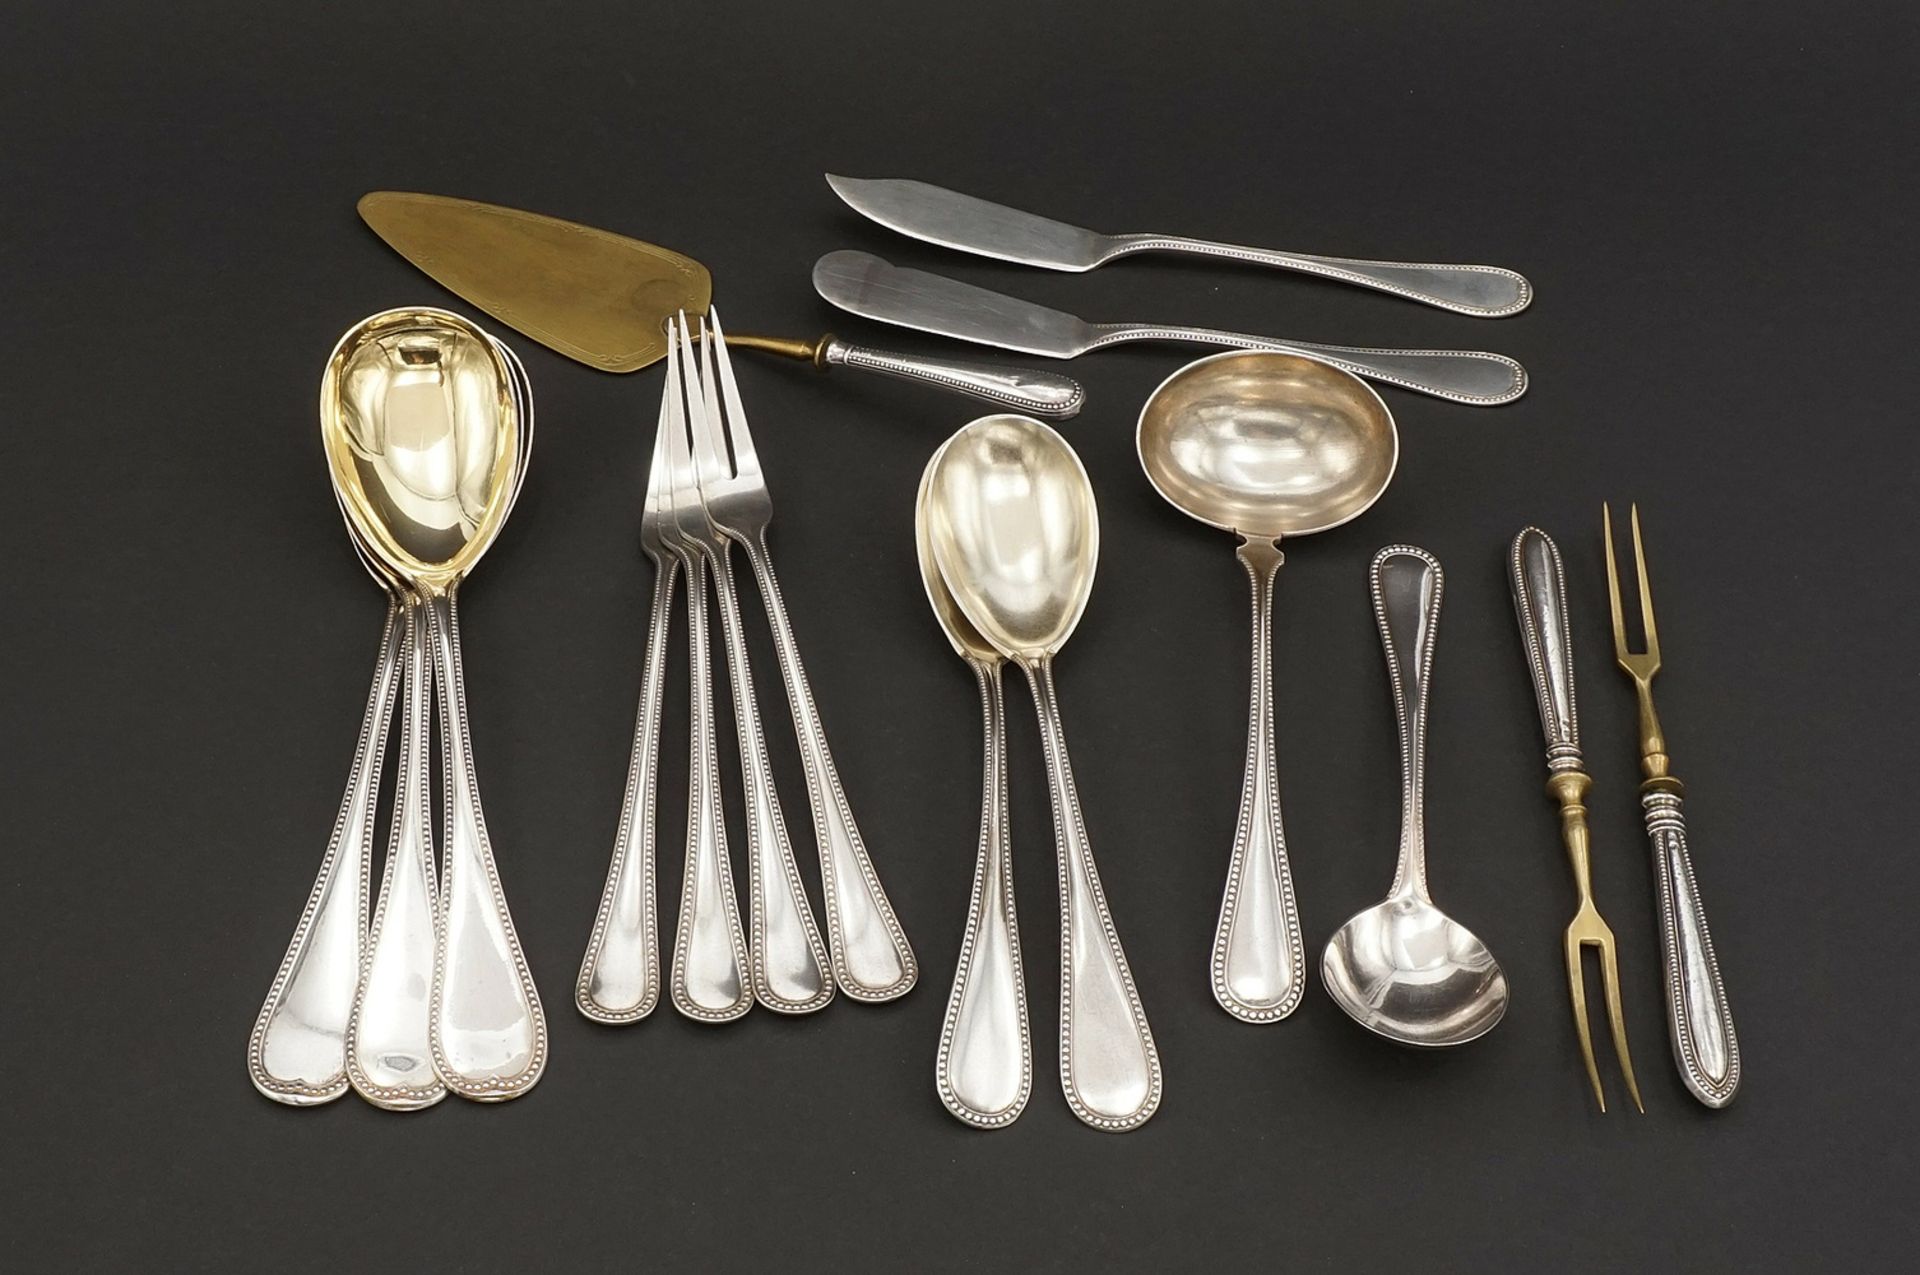 Silver cutlery for 12 people with serving cutlery in pearl decor - Image 4 of 4